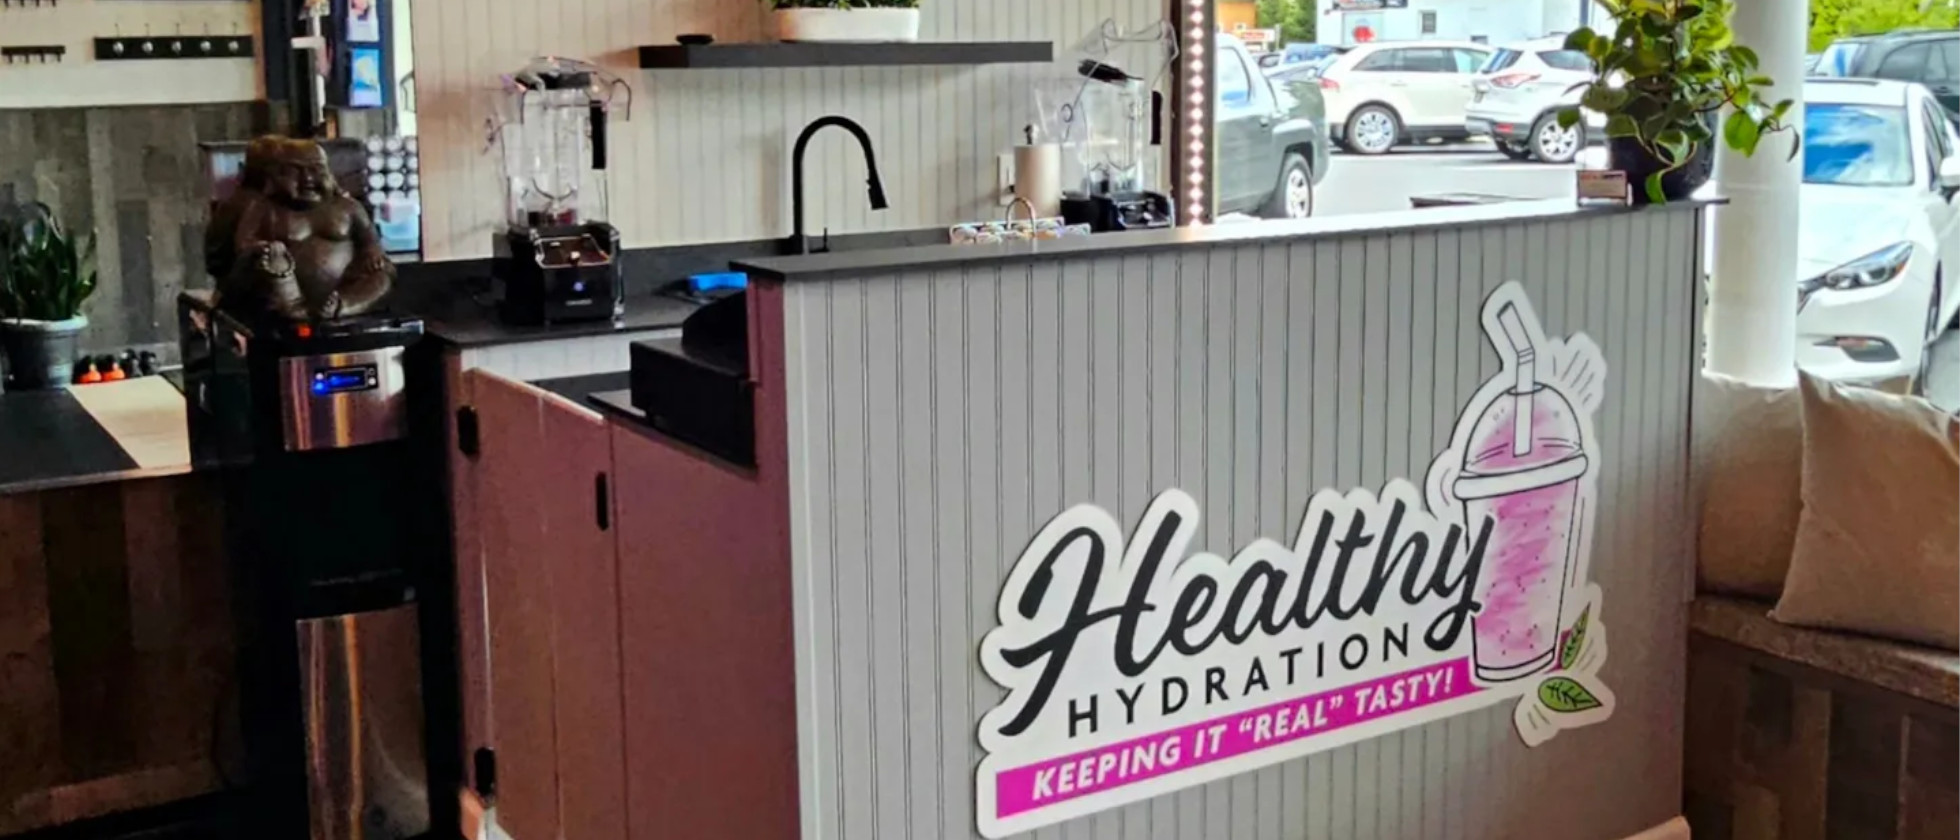 Find refreshing healthy hydration smoothies near me at our gym in Boonton